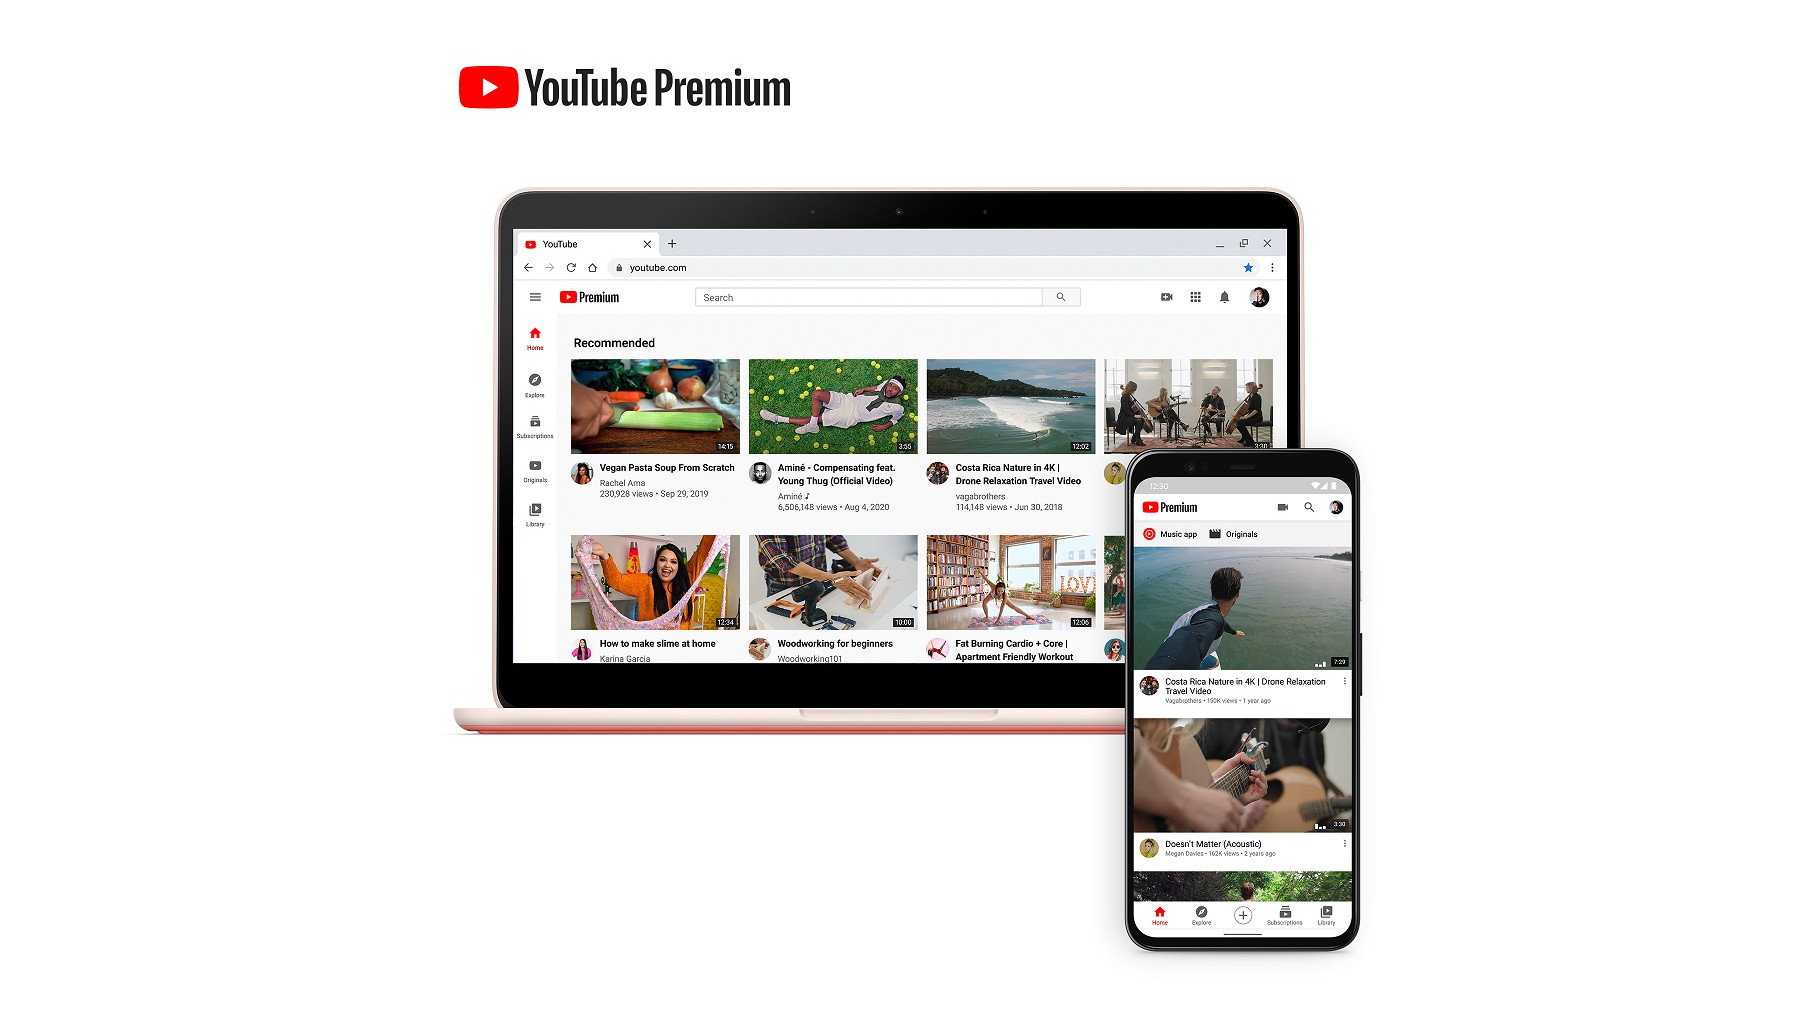 YouTube Premium 3 Months Subscription Key (ONLY FOR NEW ACCOUNTS)